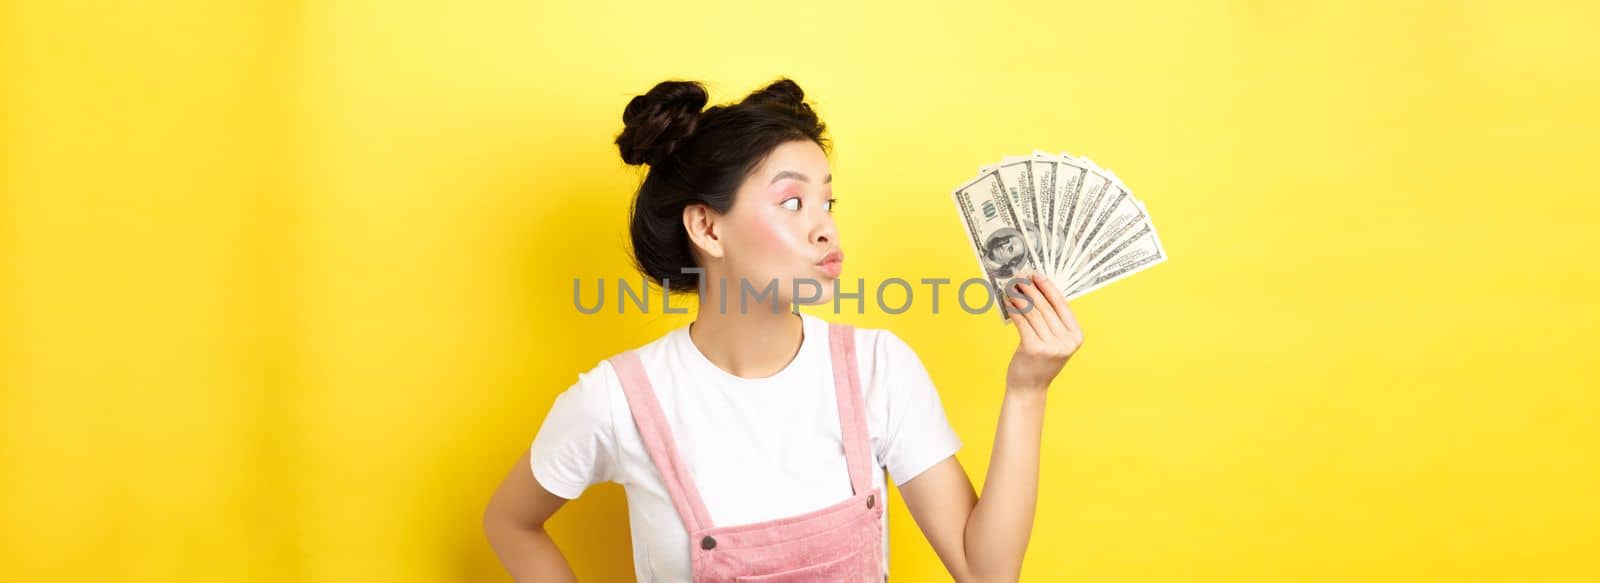 Shopping. Silly korean girl with glam makeup, pucker lips and looking at dollar bills, wasting money, standing on yellow background.